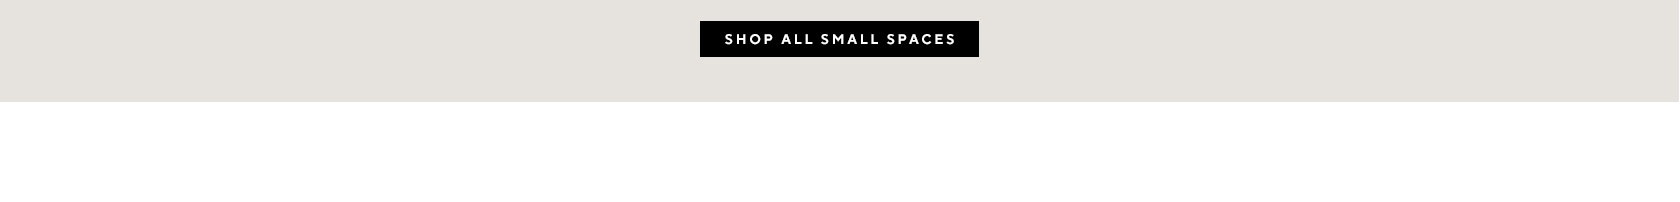 Shop All Small Spaces